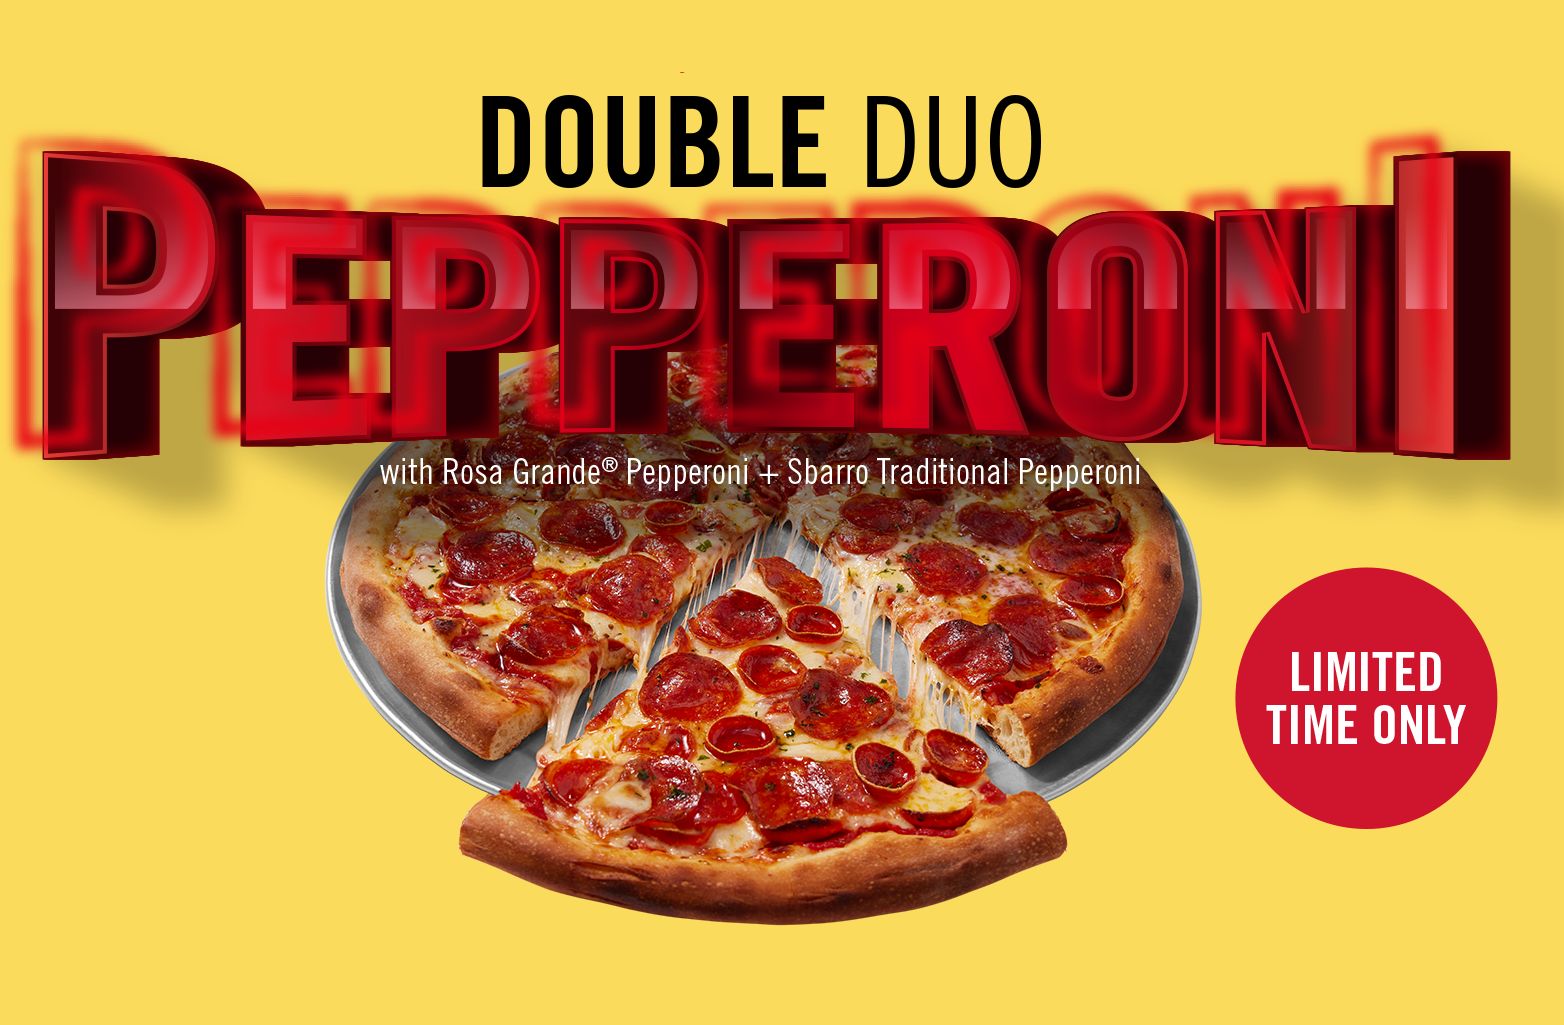 Sbarro’s Double Duo Pepperoni Pizza is Now Available for a Limited Time